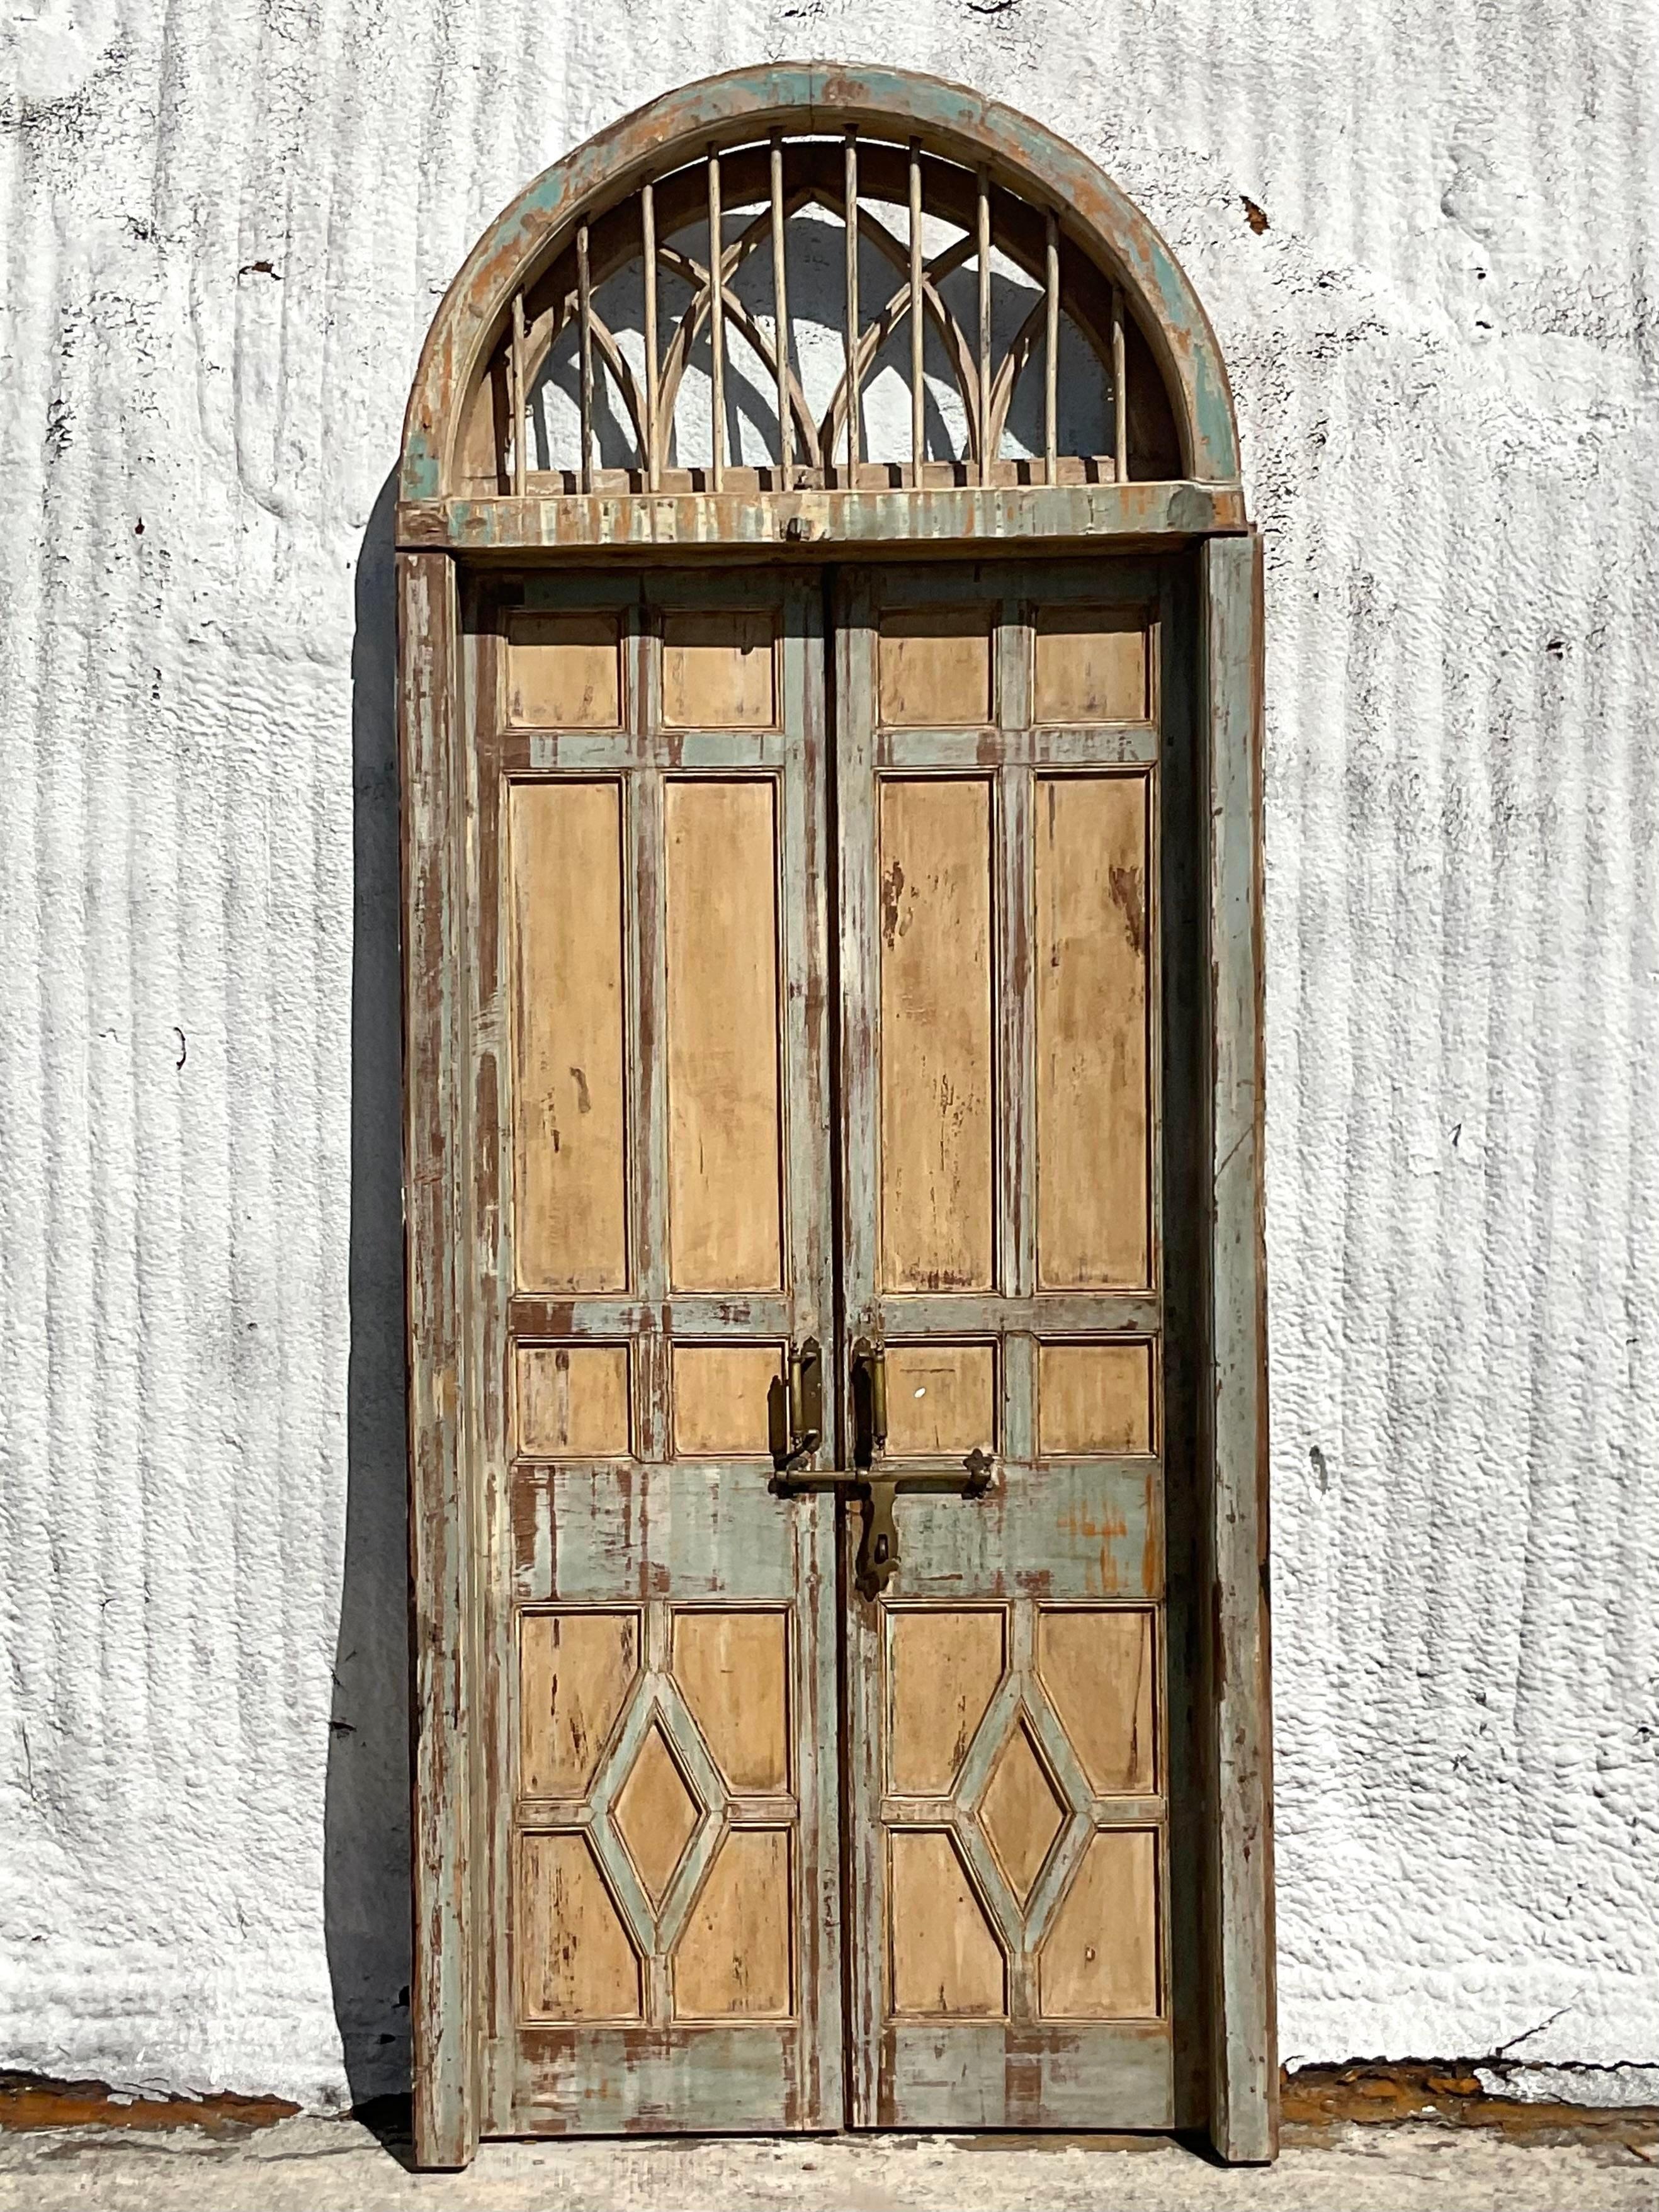 An extraordinary pair of vintage Italian doors. Beautiful tall doors with coordinating working transom window above. The most incredible patina from time. Design a whole house around them! Acquired from a Palm Beach estate.